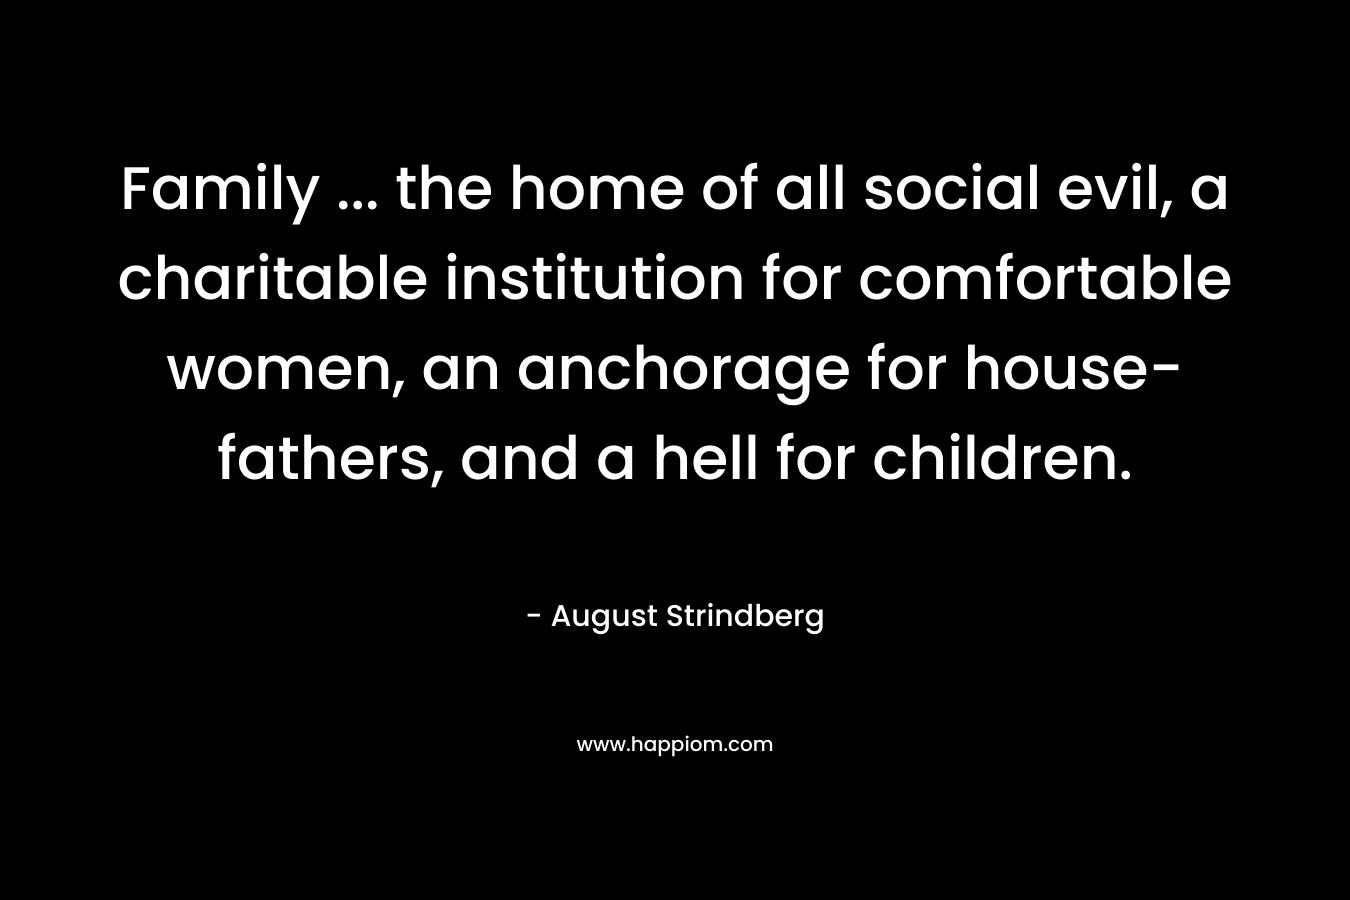 Family ... the home of all social evil, a charitable institution for comfortable women, an anchorage for house-fathers, and a hell for children.